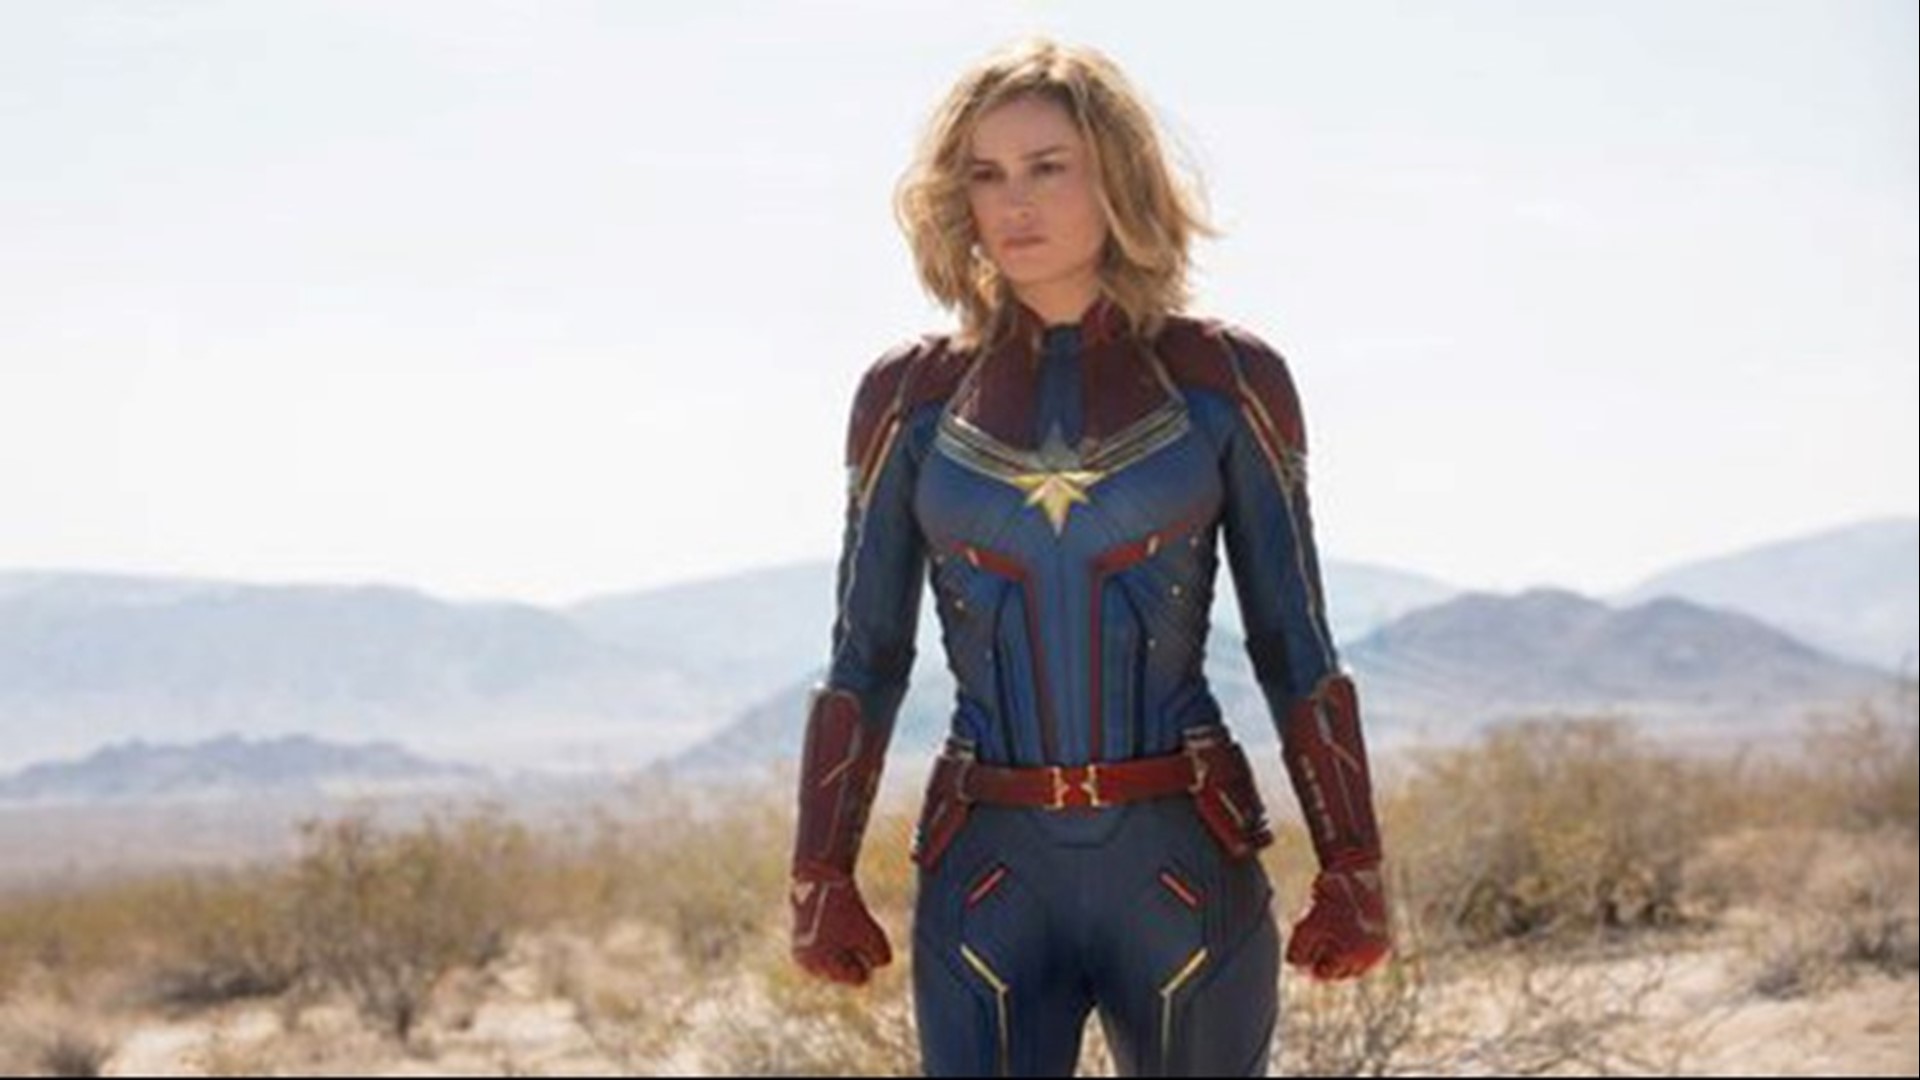 Set in the 1990s, “Captain Marvel” is an all-new adventure from a previously unseen period in the history of the Marvel Cinematic Universe